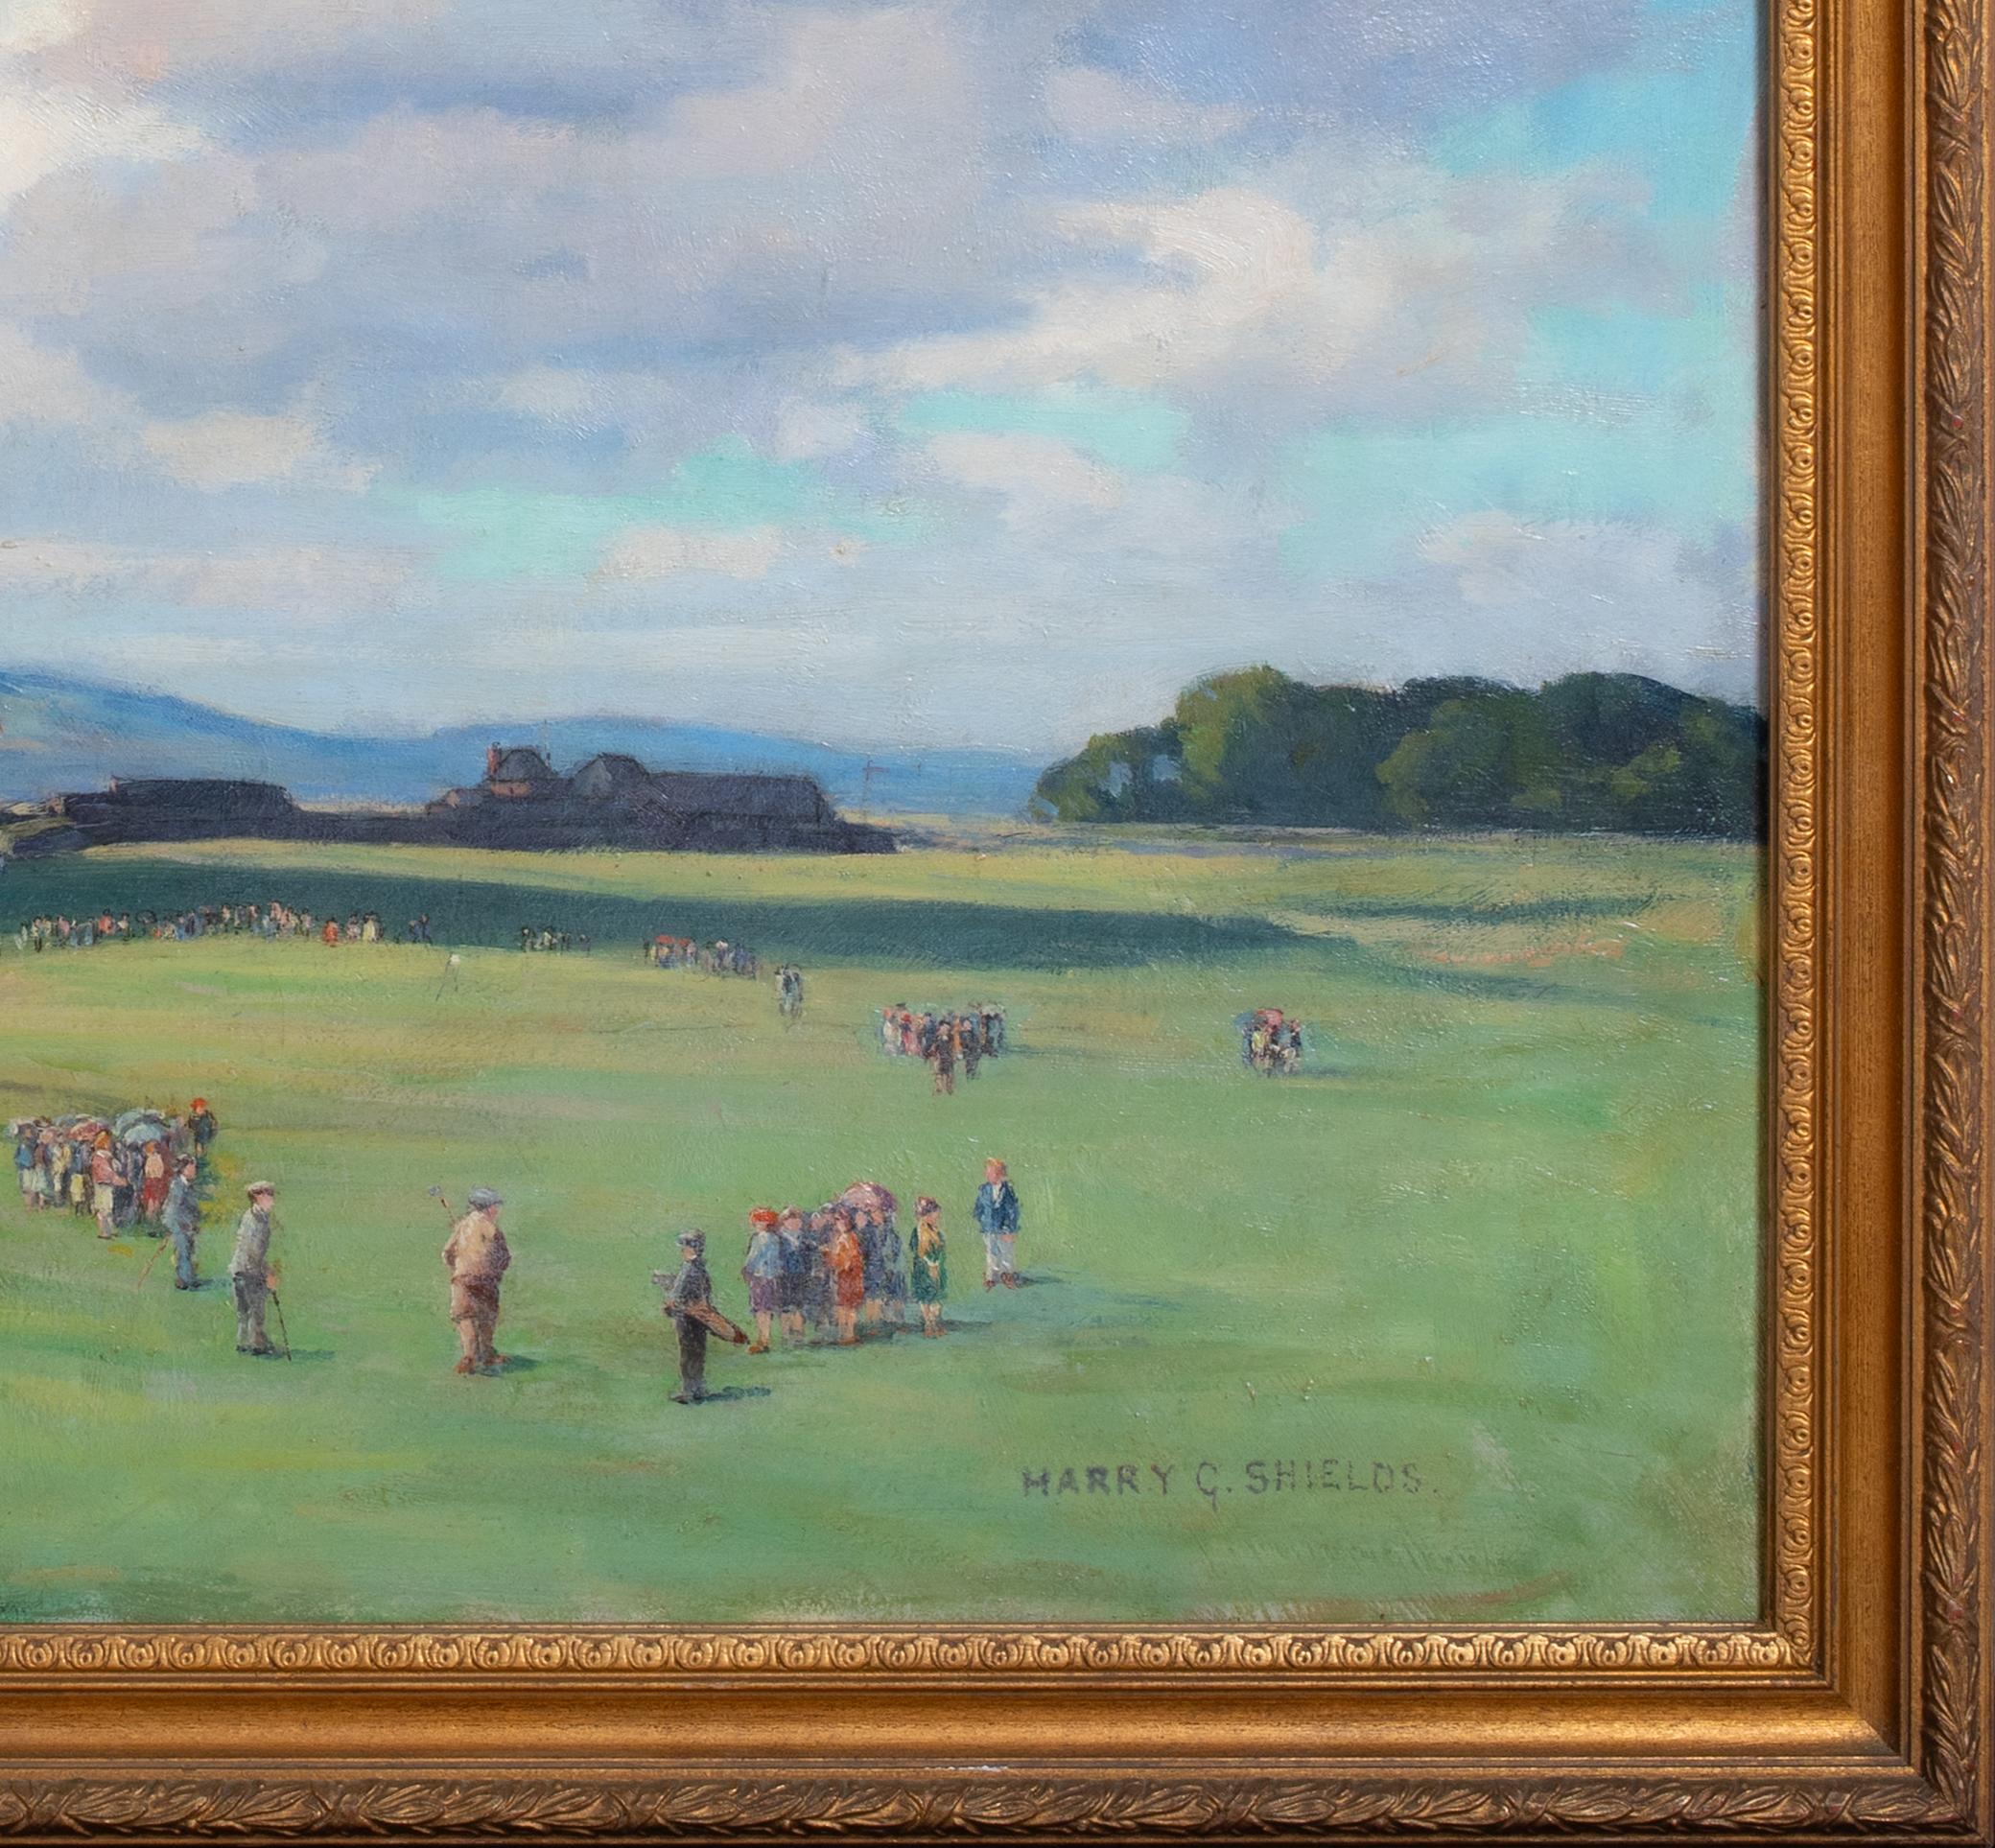 The Old Course, St Andrews, circa 1900

by Harry Gordon Shields R.B.A. (1859-1935)

Large circa 1900 landscape view of The Old Course, the first green, St Andrews, oil on canvas by Harry Gordon Shields. Excellent quality and condition extensive view